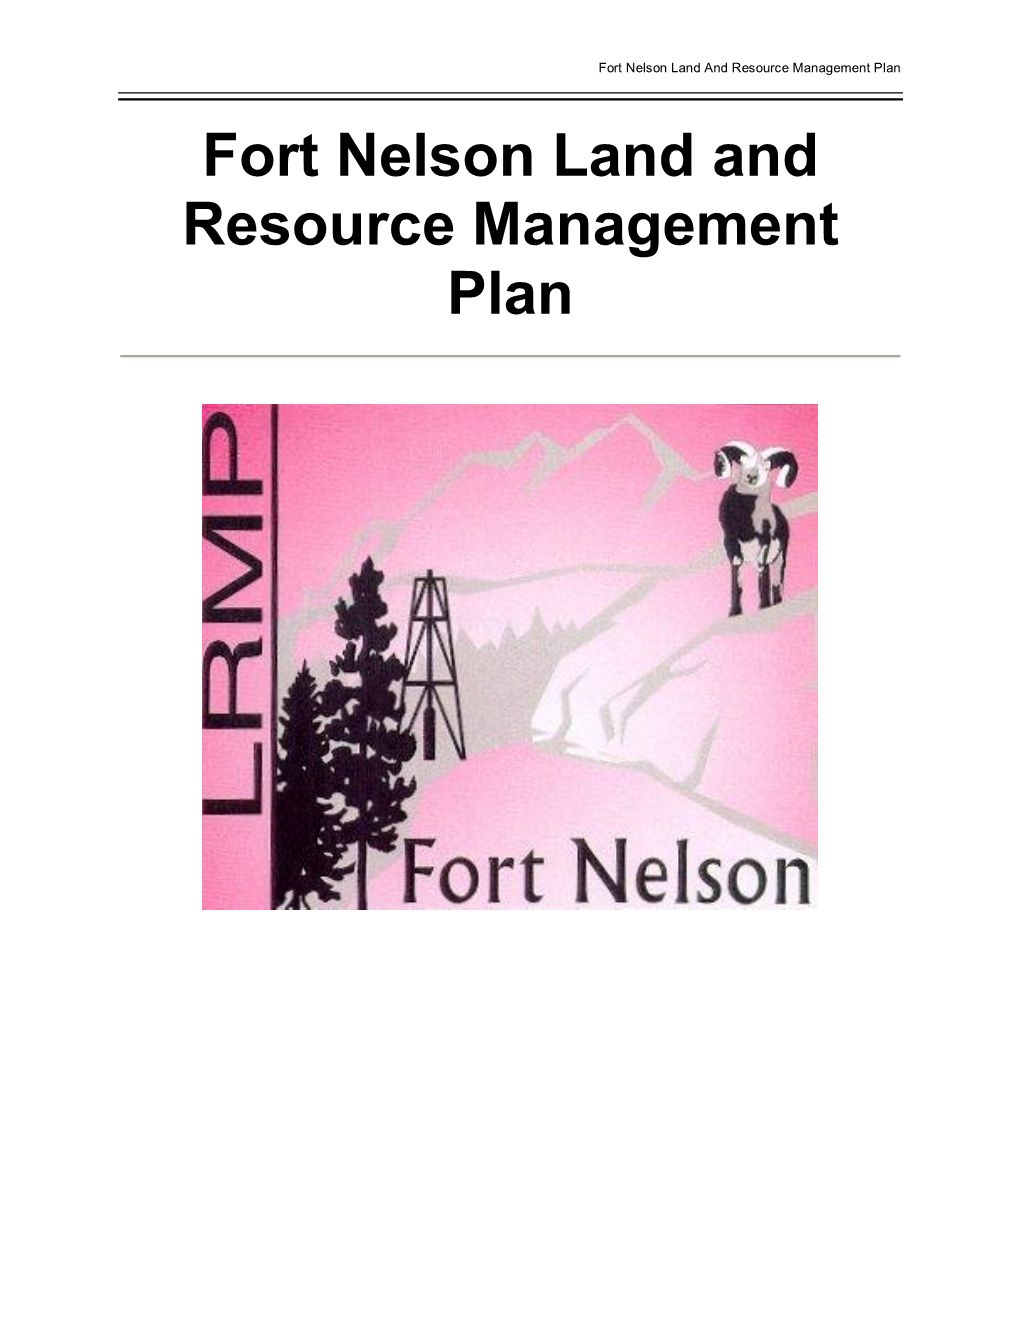 Fort Nelson LRMP Does Not Indicate Acceptance (Or Any Other Decision) by Government Regarding the Identified Issues